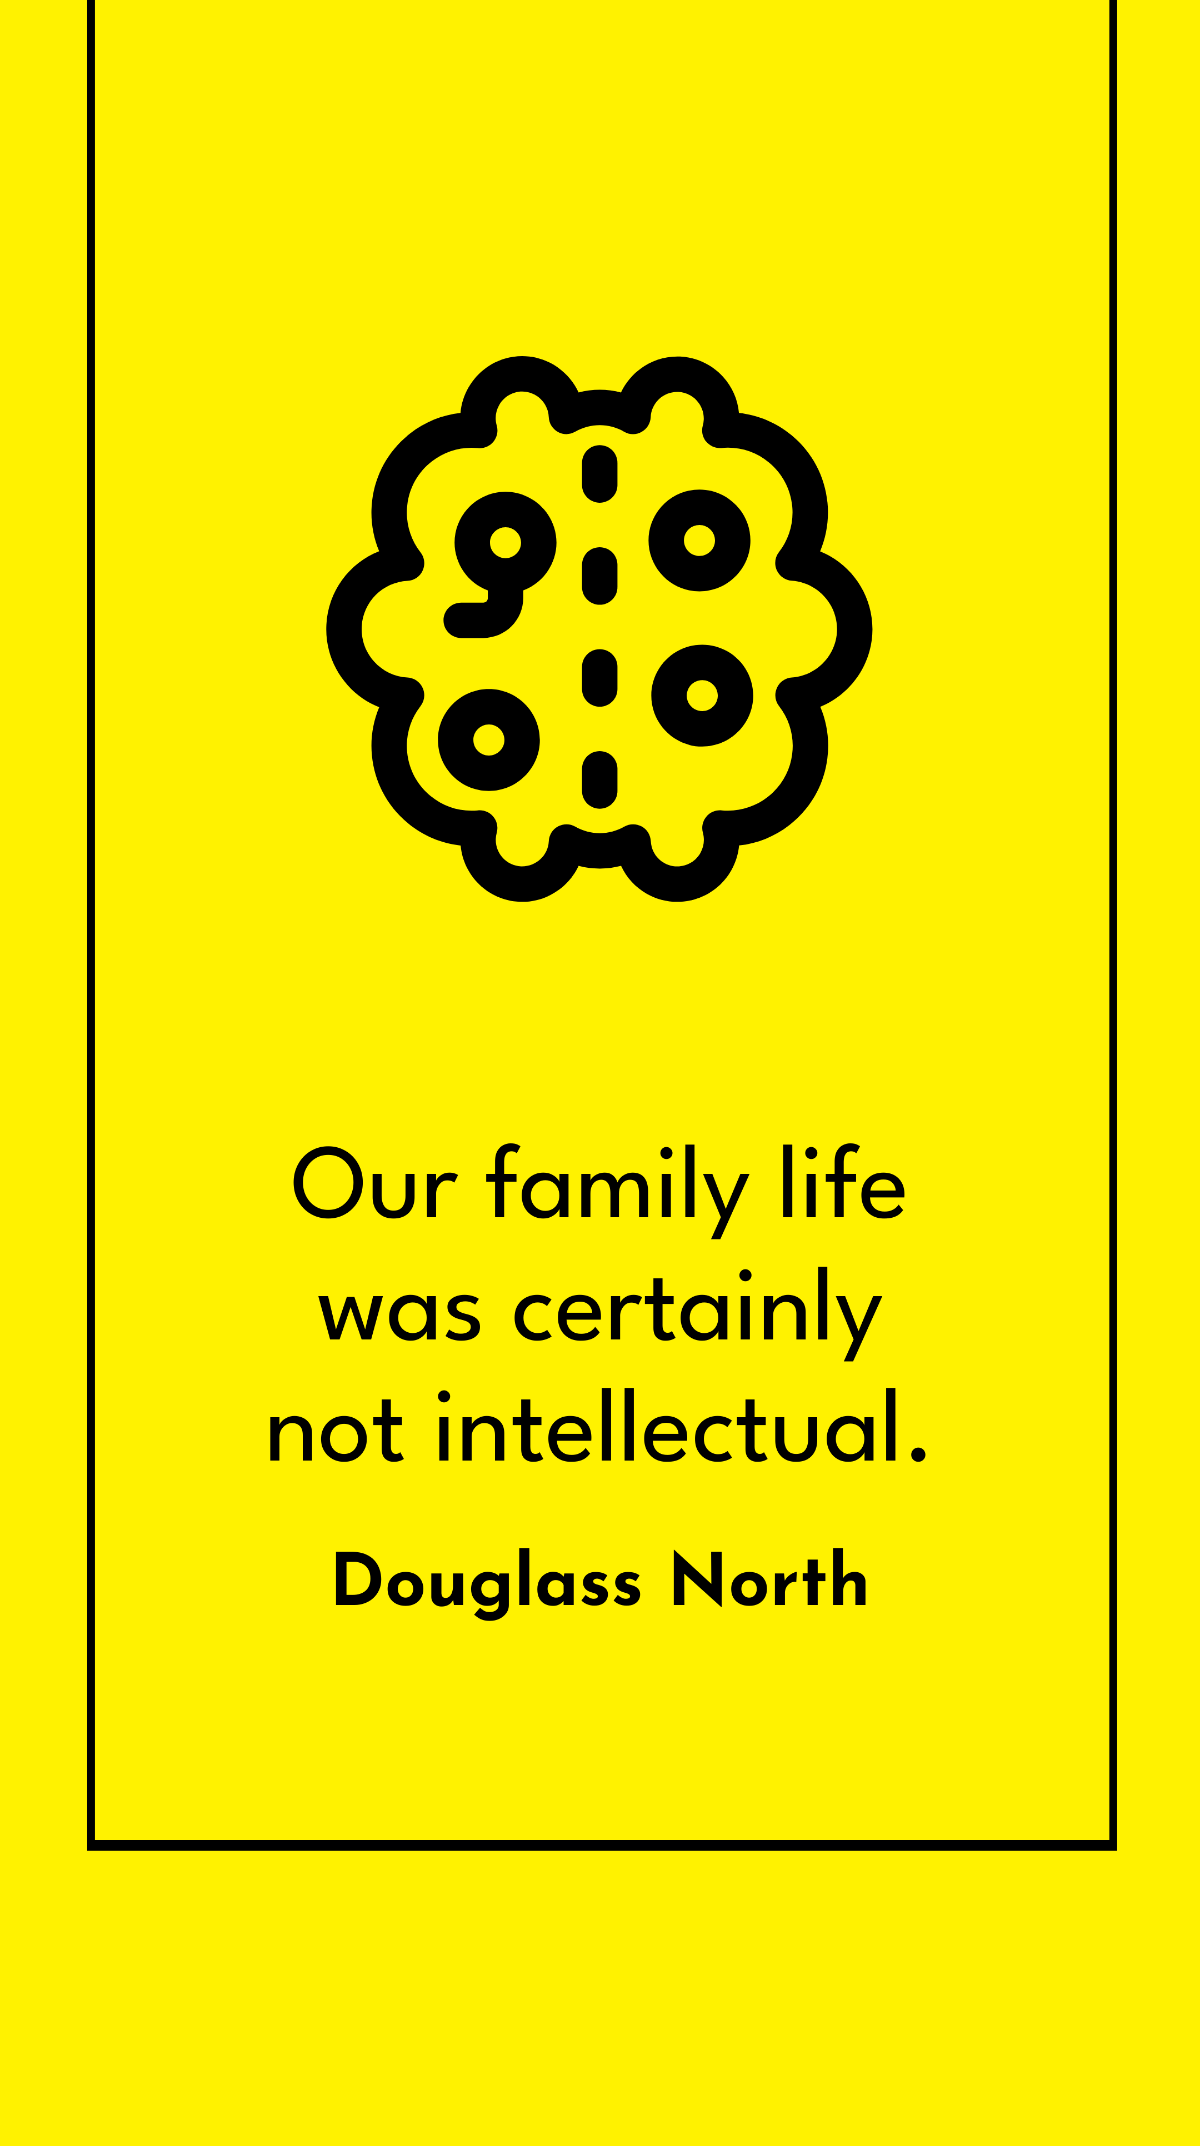 Free Douglass North - Our family life was certainly not intellectual. Template